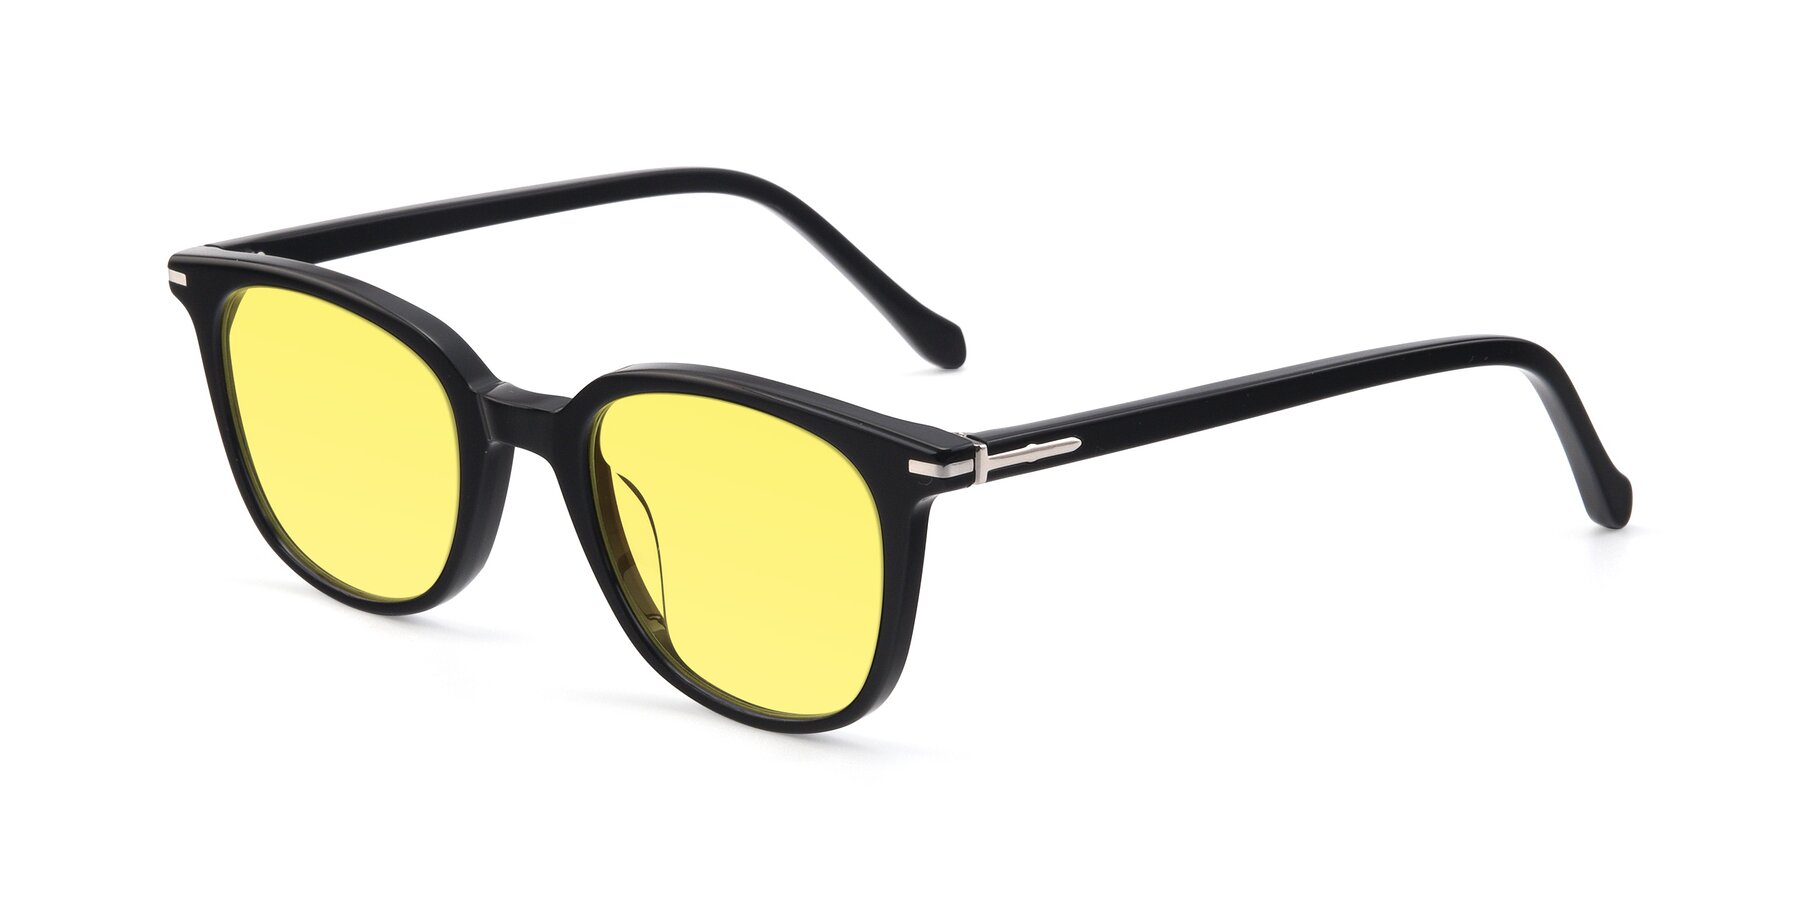 Angle of 17562 in Black with Medium Yellow Tinted Lenses